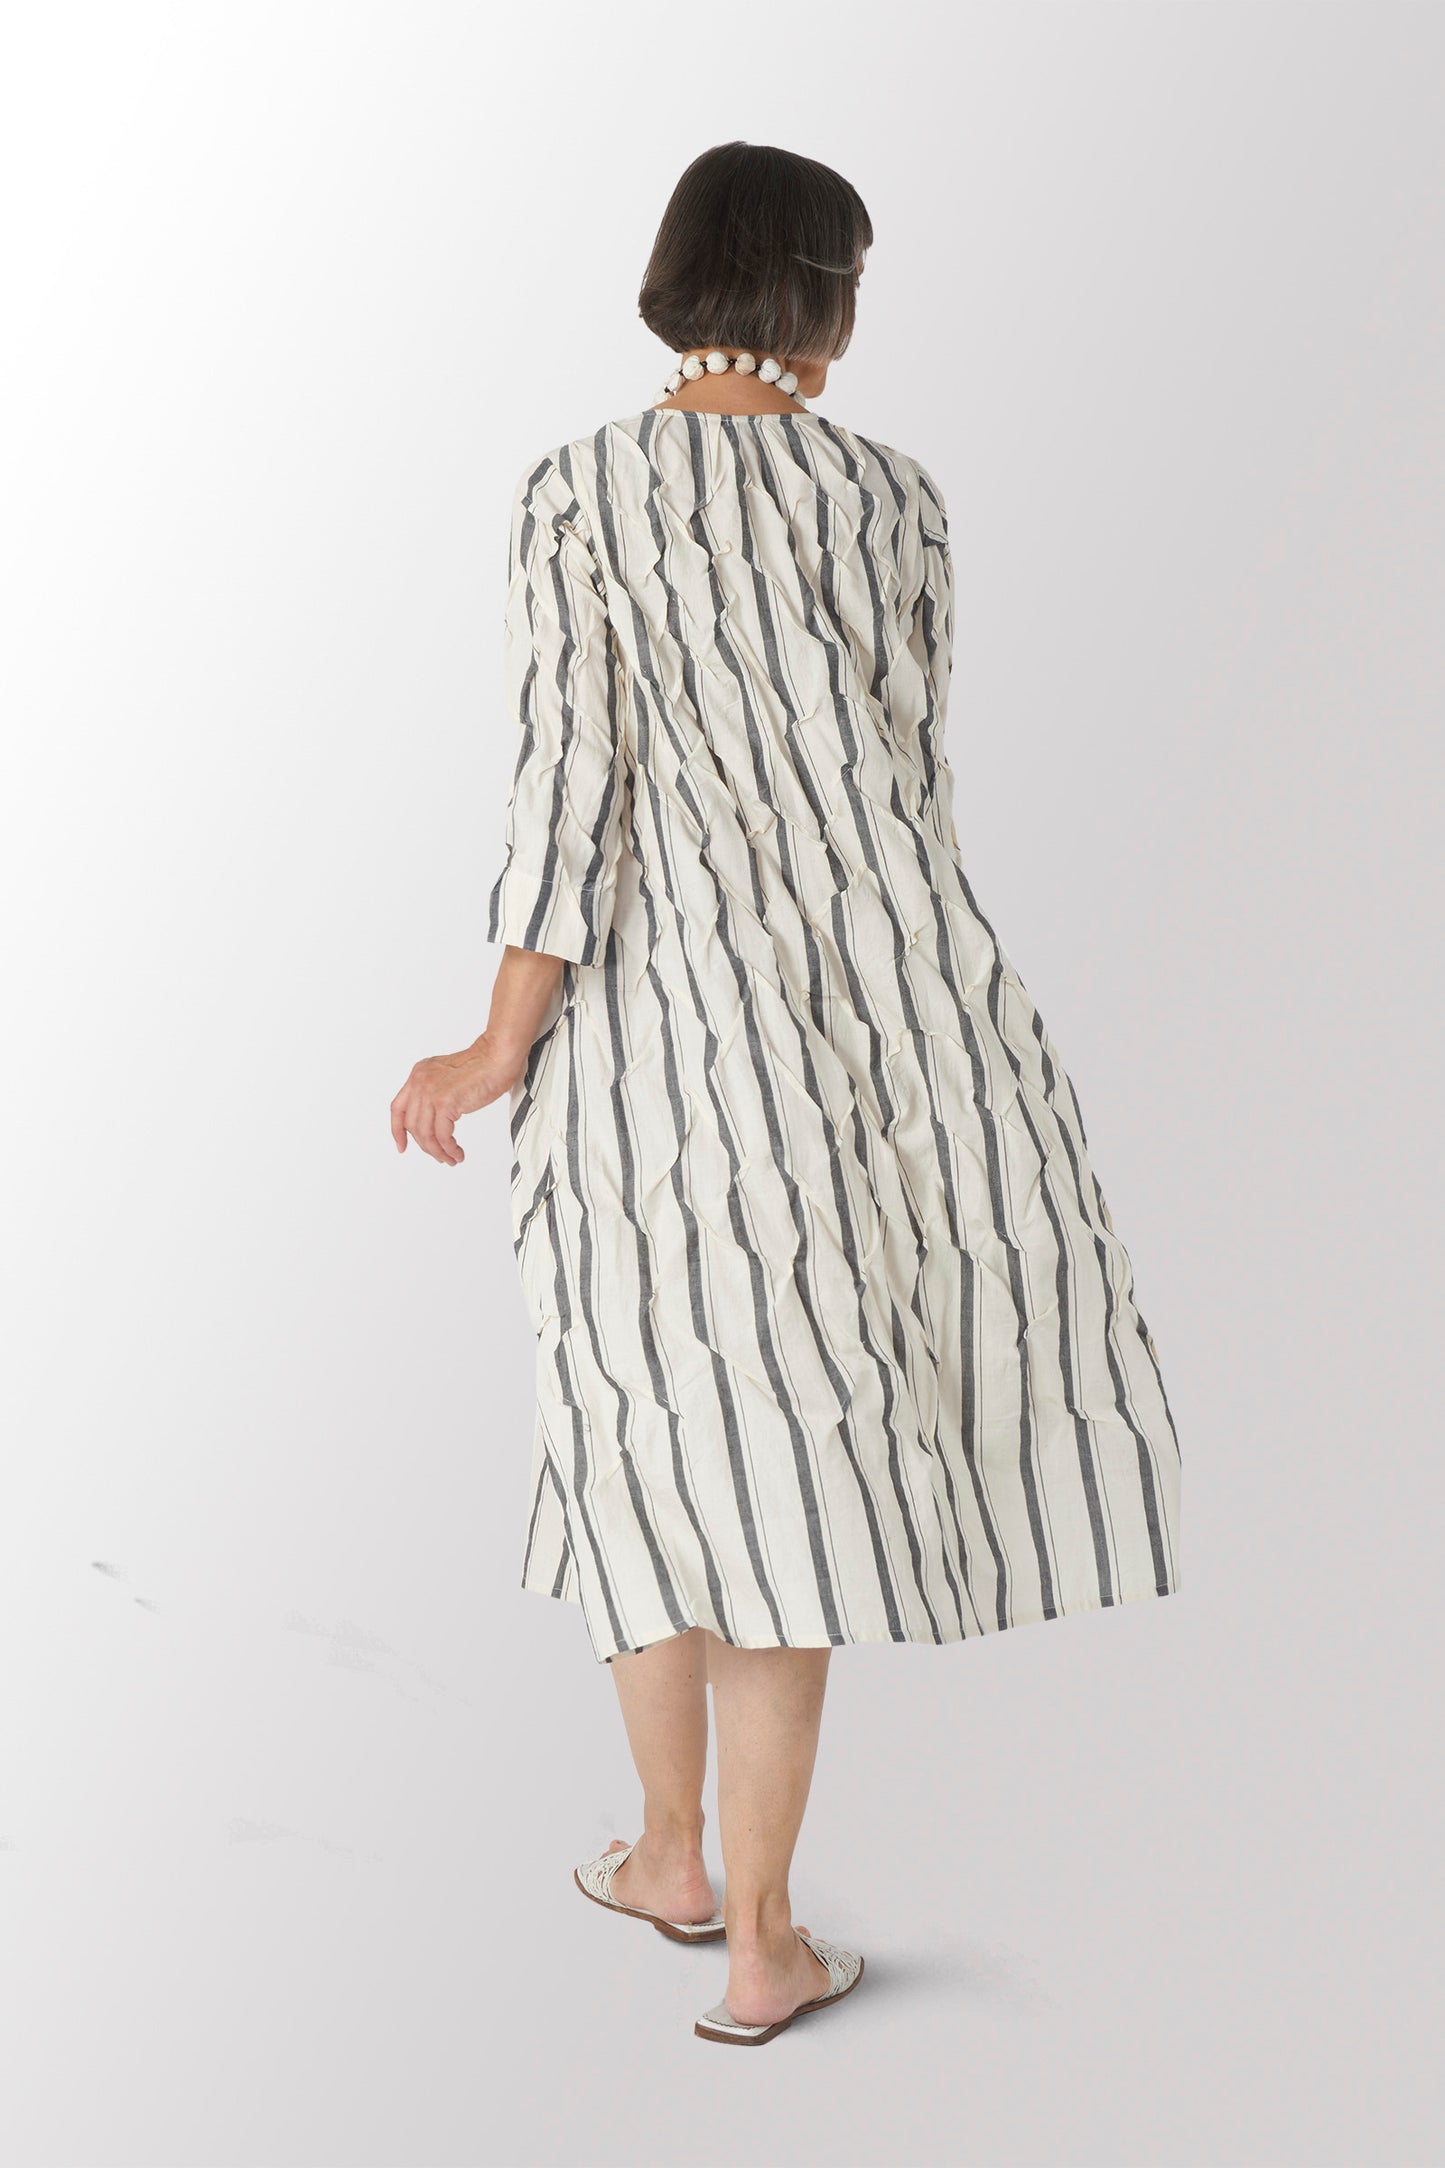 WOVEN DOUBLE STRIPES COTTON WAVY TUCK A-LINE DRESS - wd1453-ivy -